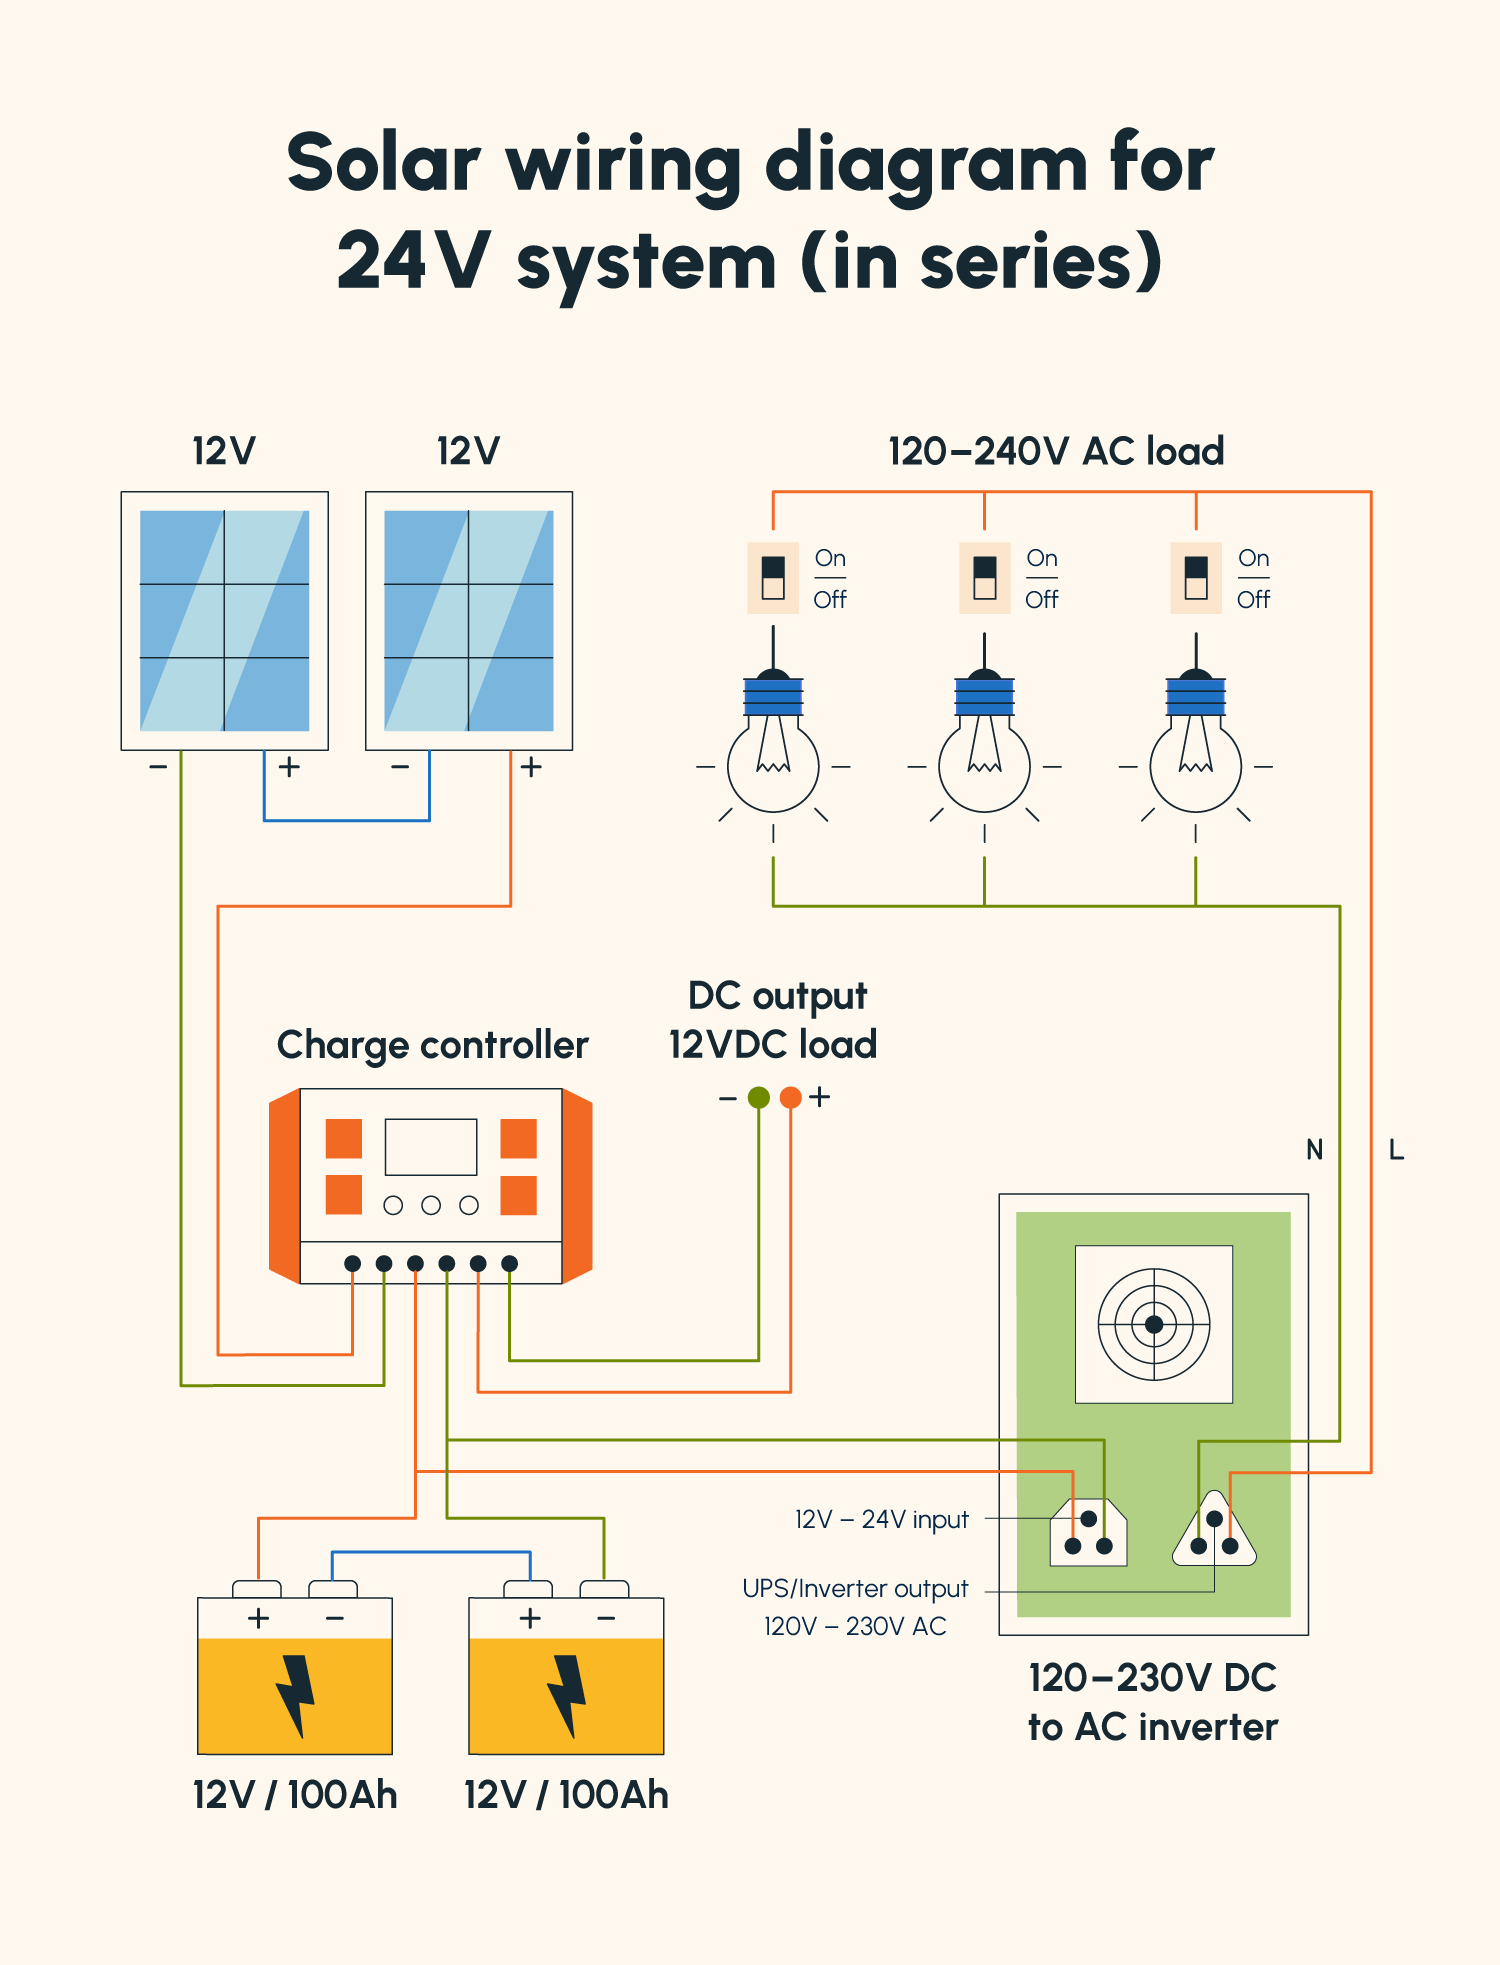 An illustrated solar panel wiring diagram for a 24V solar system wired in series